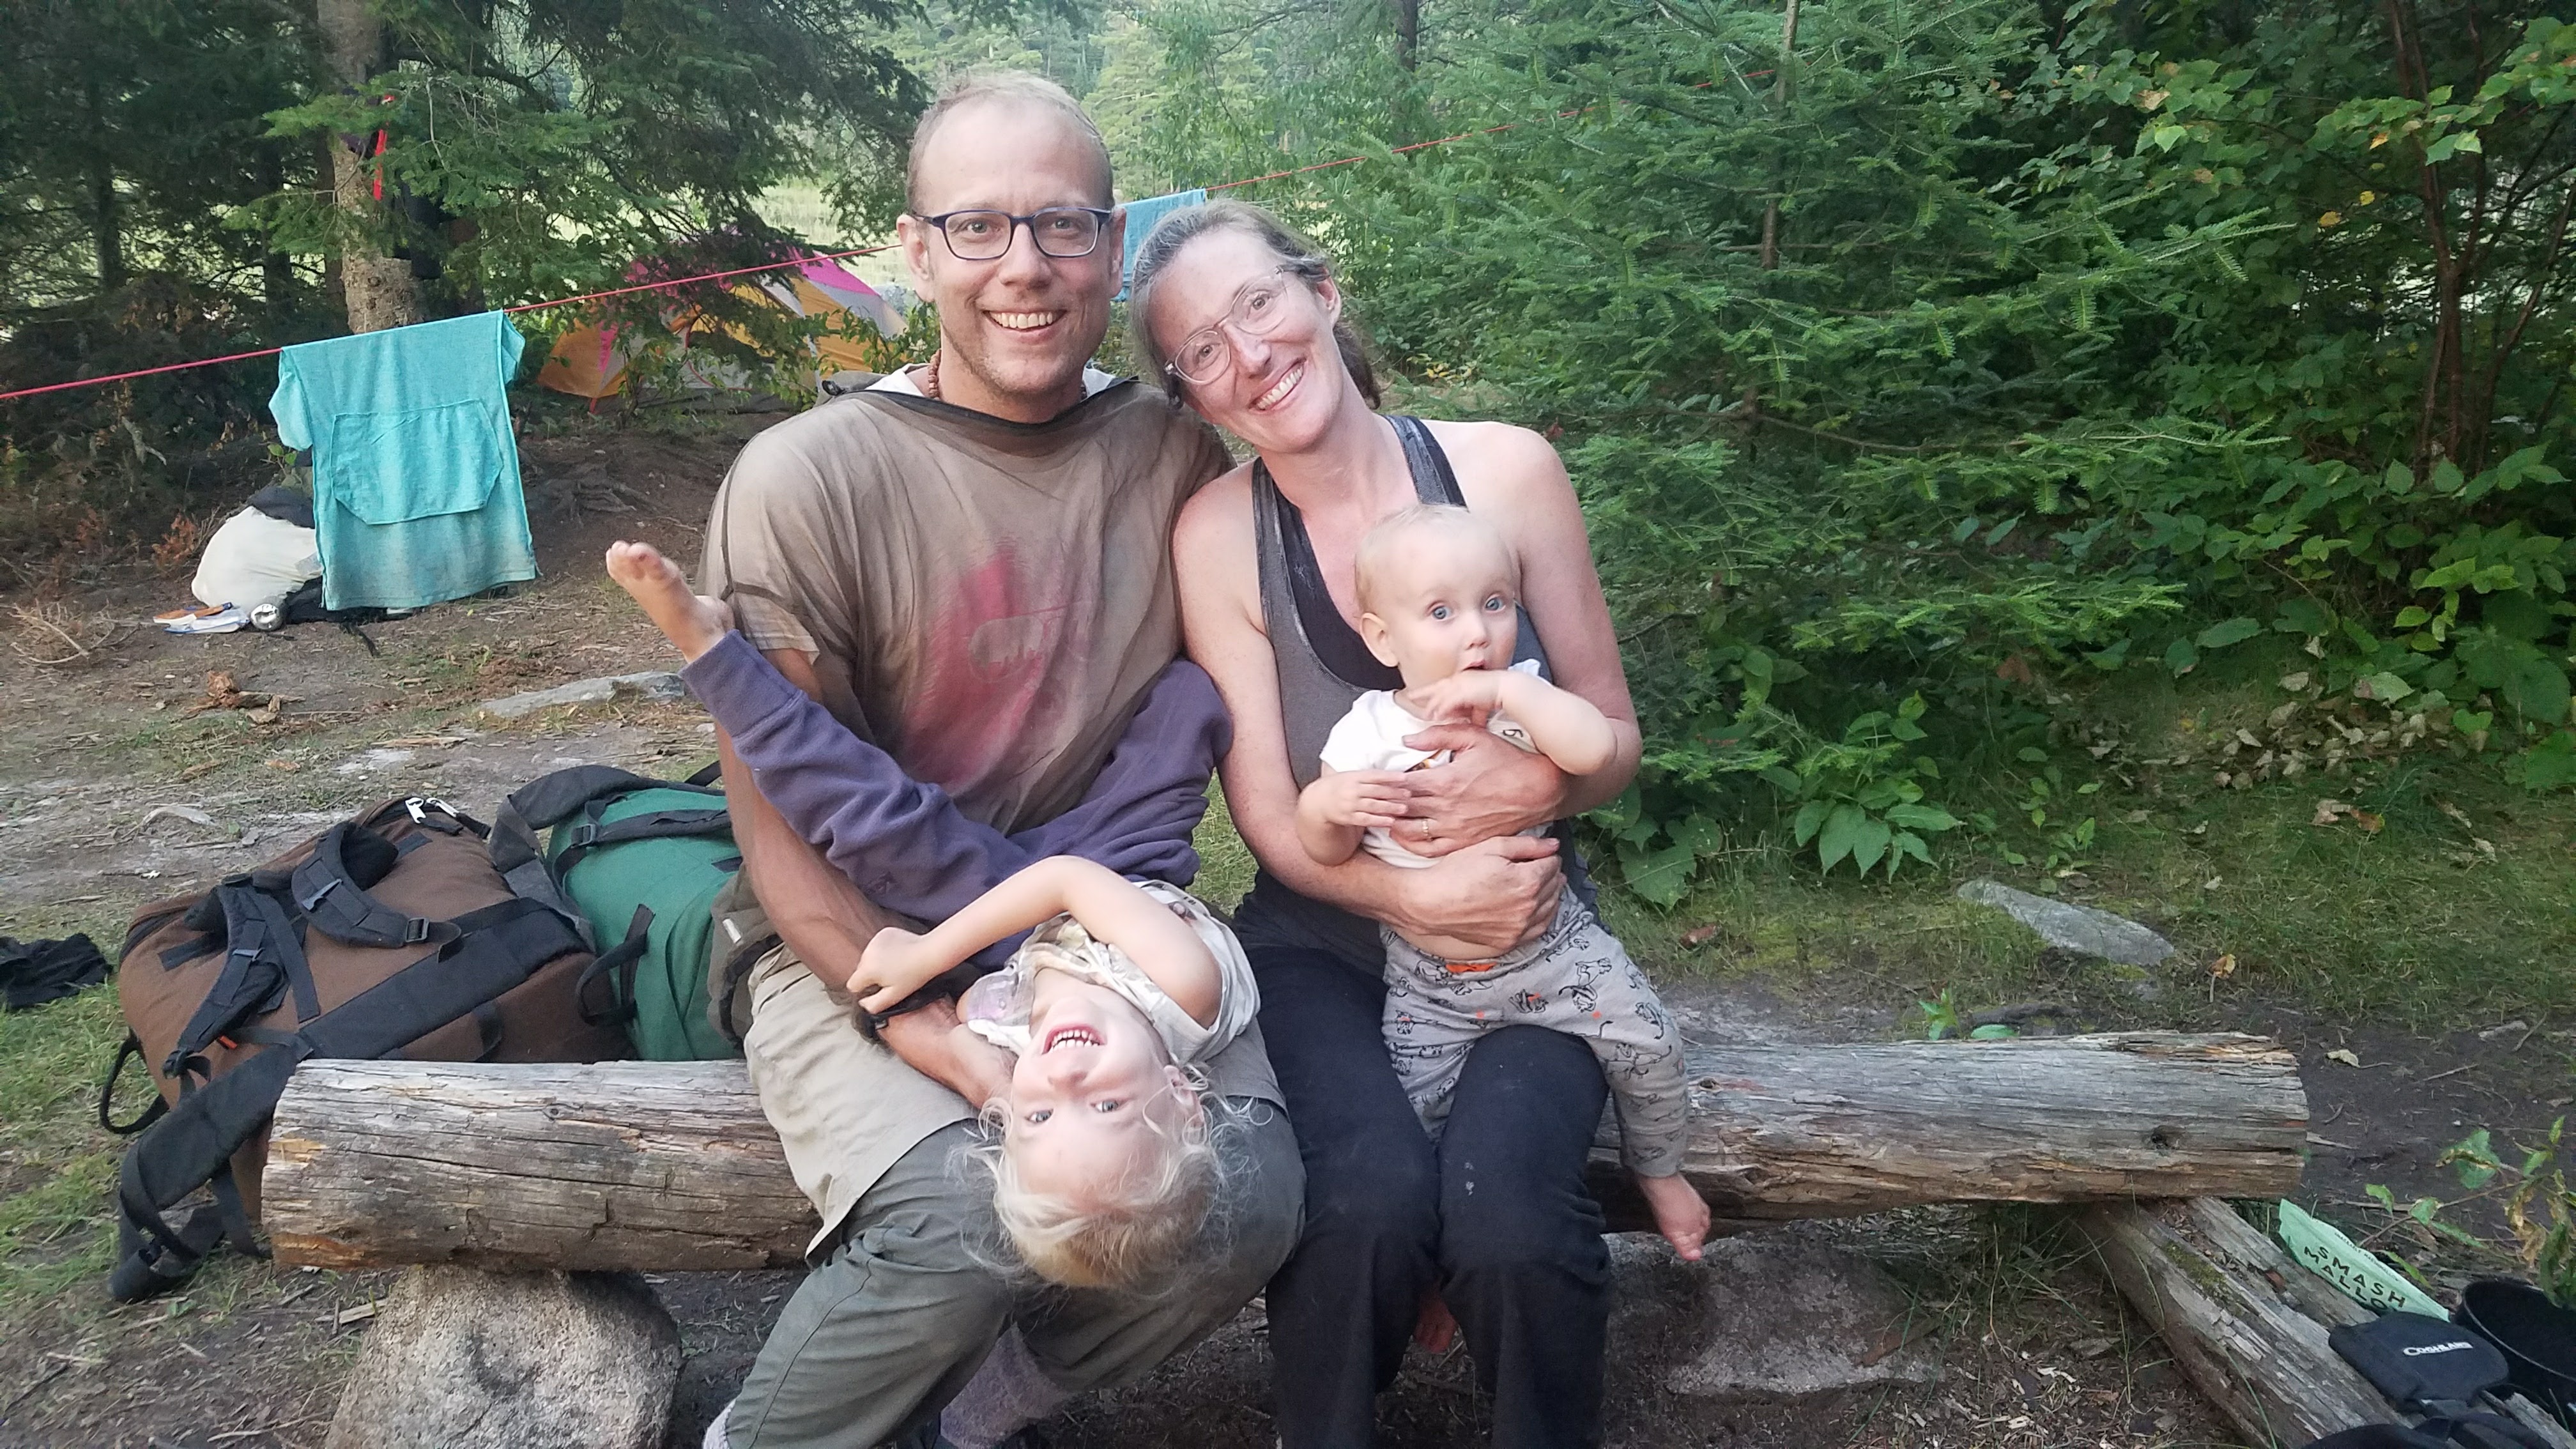 Man and woman posing with their two small children at a campsite